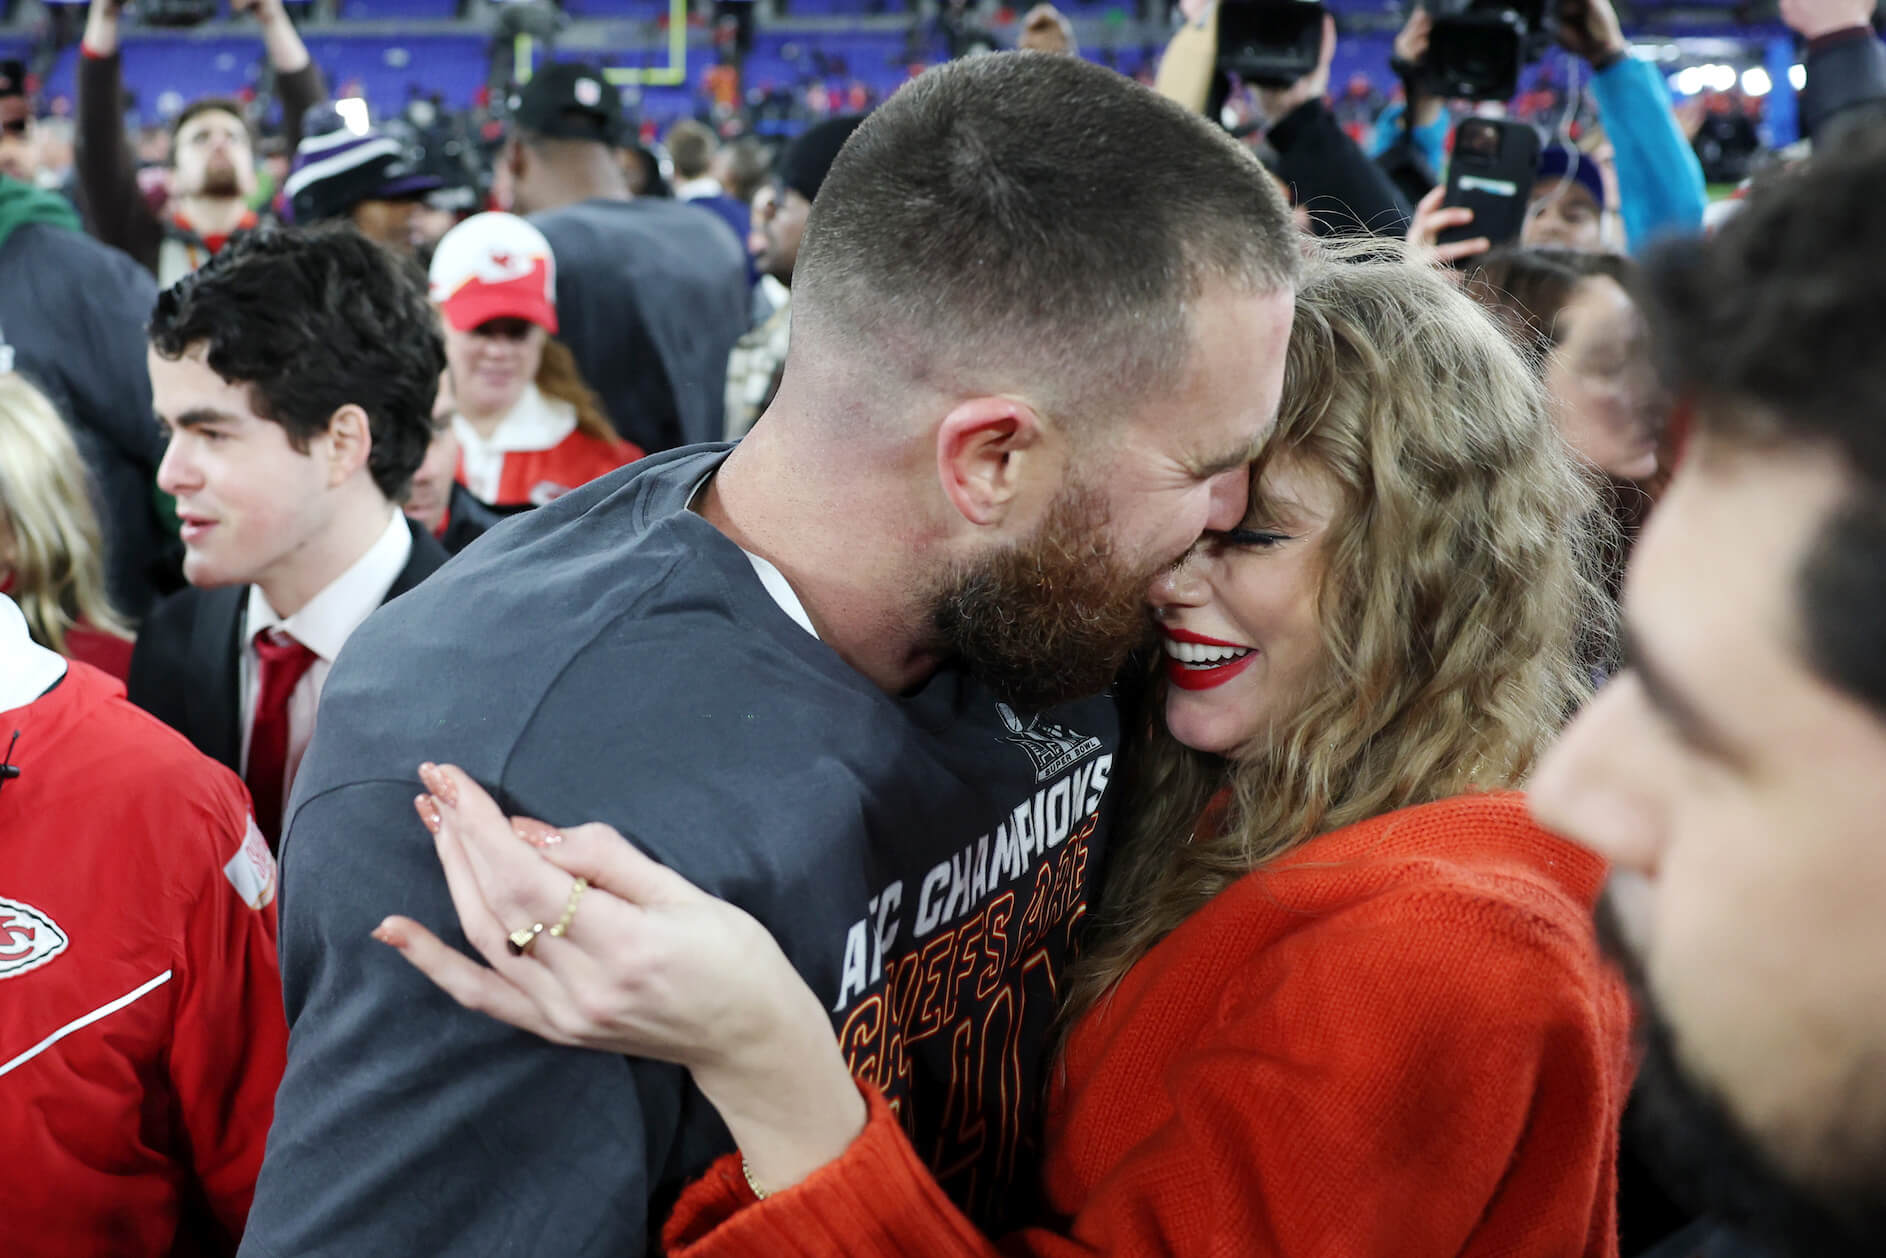 Travis Kelce tightly hugging Taylor Swift among a crowd of people after a Kansas City Chiefs football game